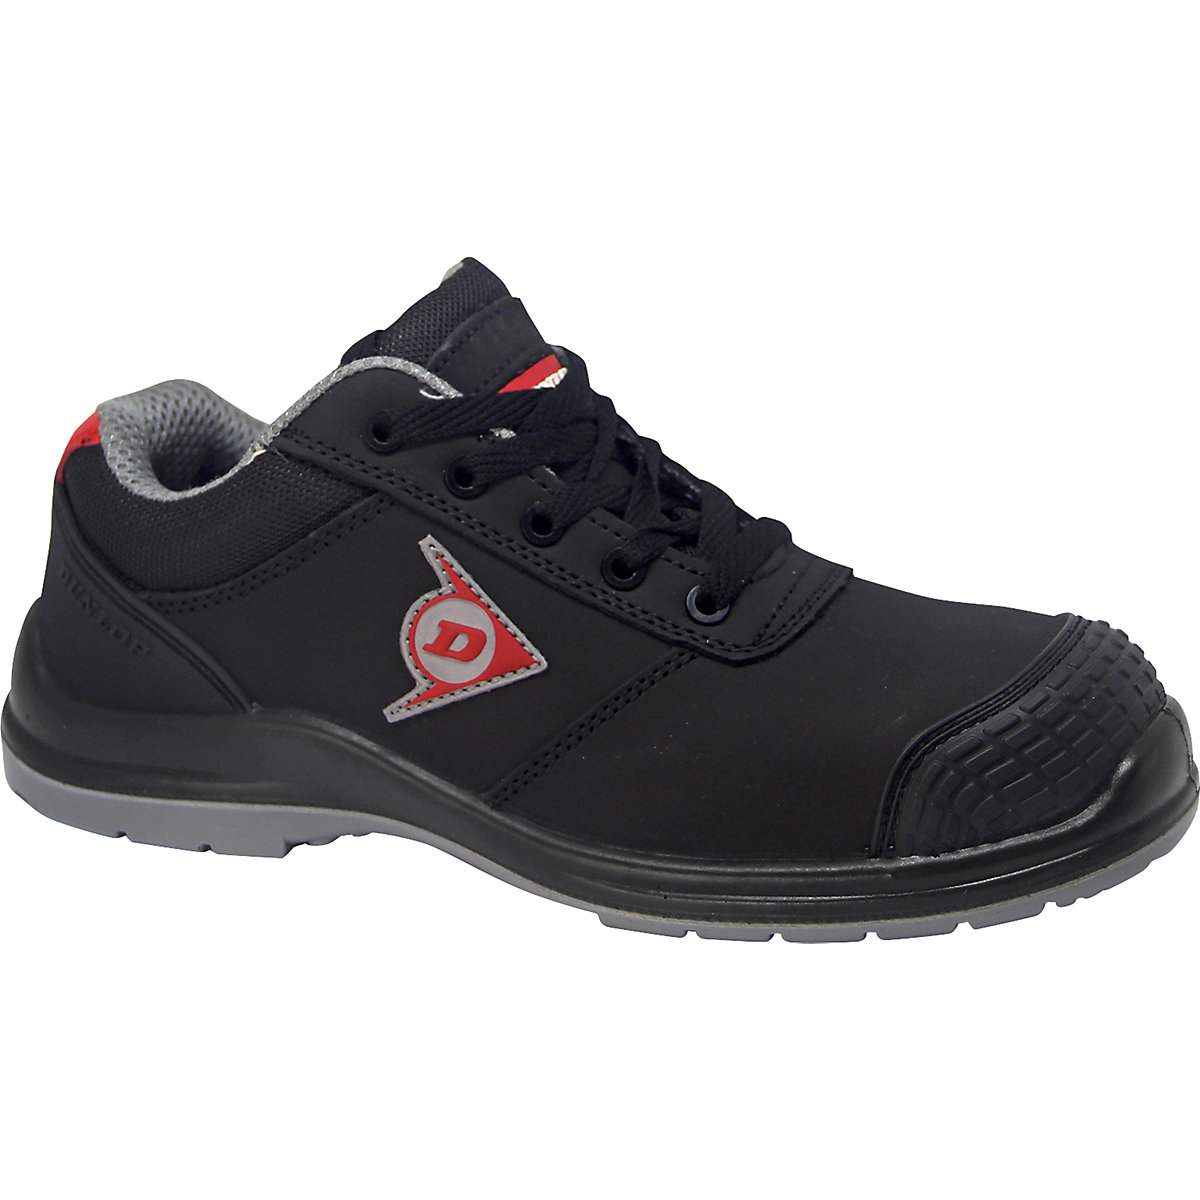 FIRST ONE ADV-EVO LOW S3 safety lace-up shoes – DUNLOP